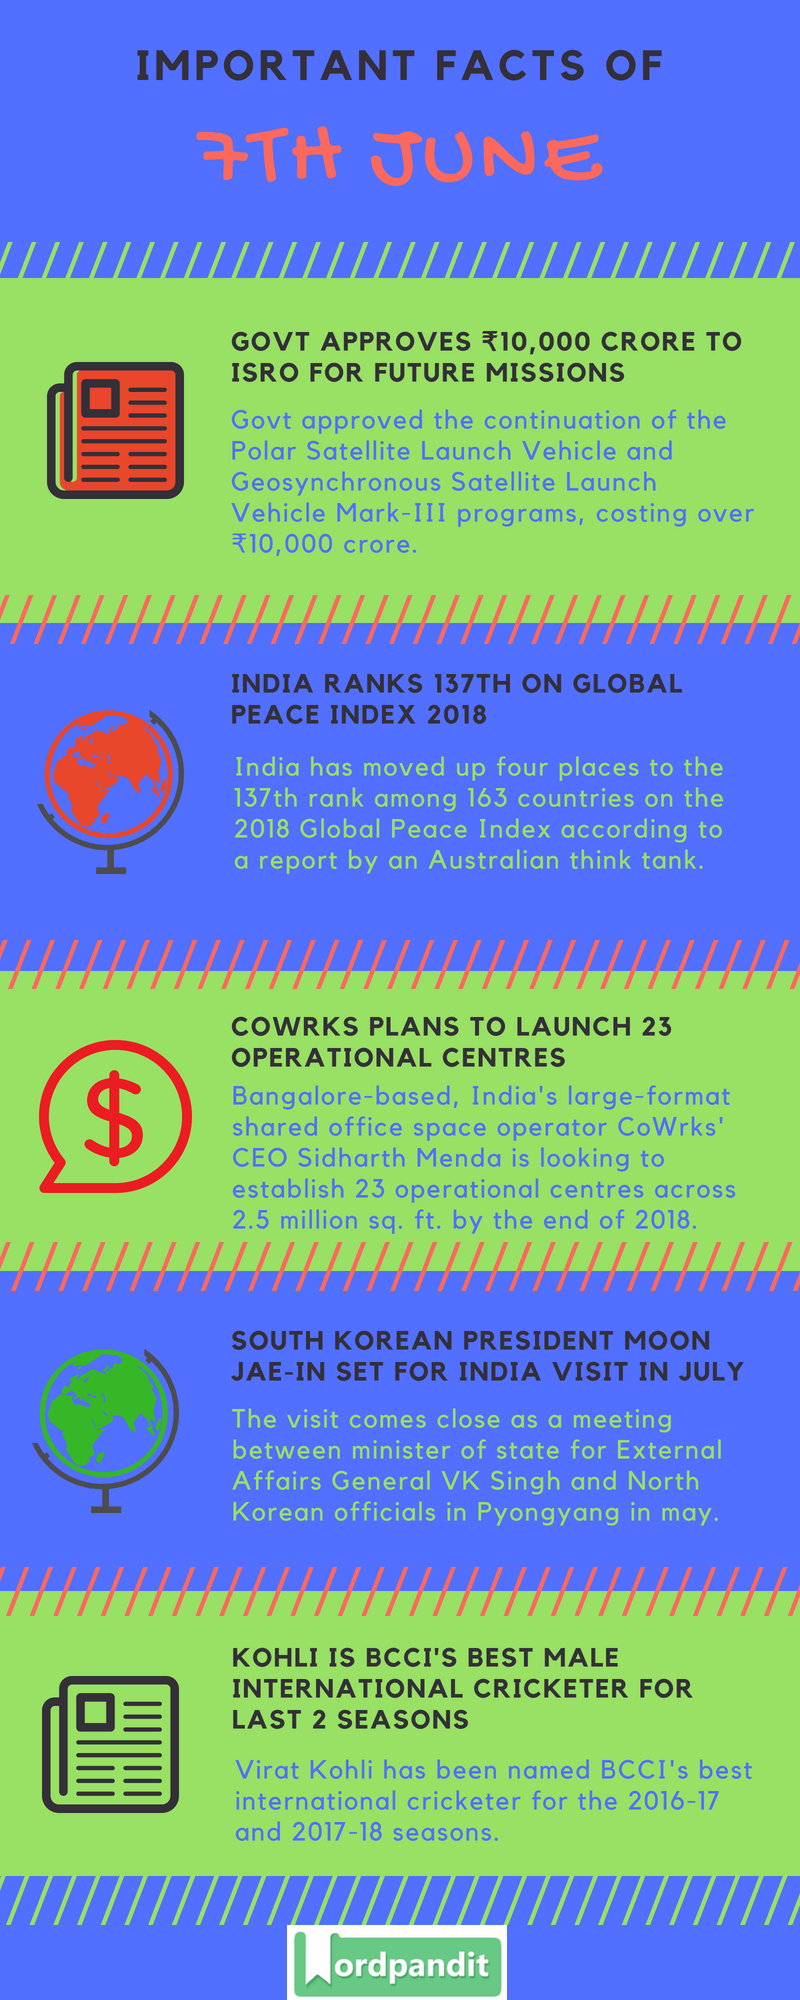 Daily Current Affairs 7 June 2018 Current Affairs Quiz June 7 2018 Current Affairs Infographic